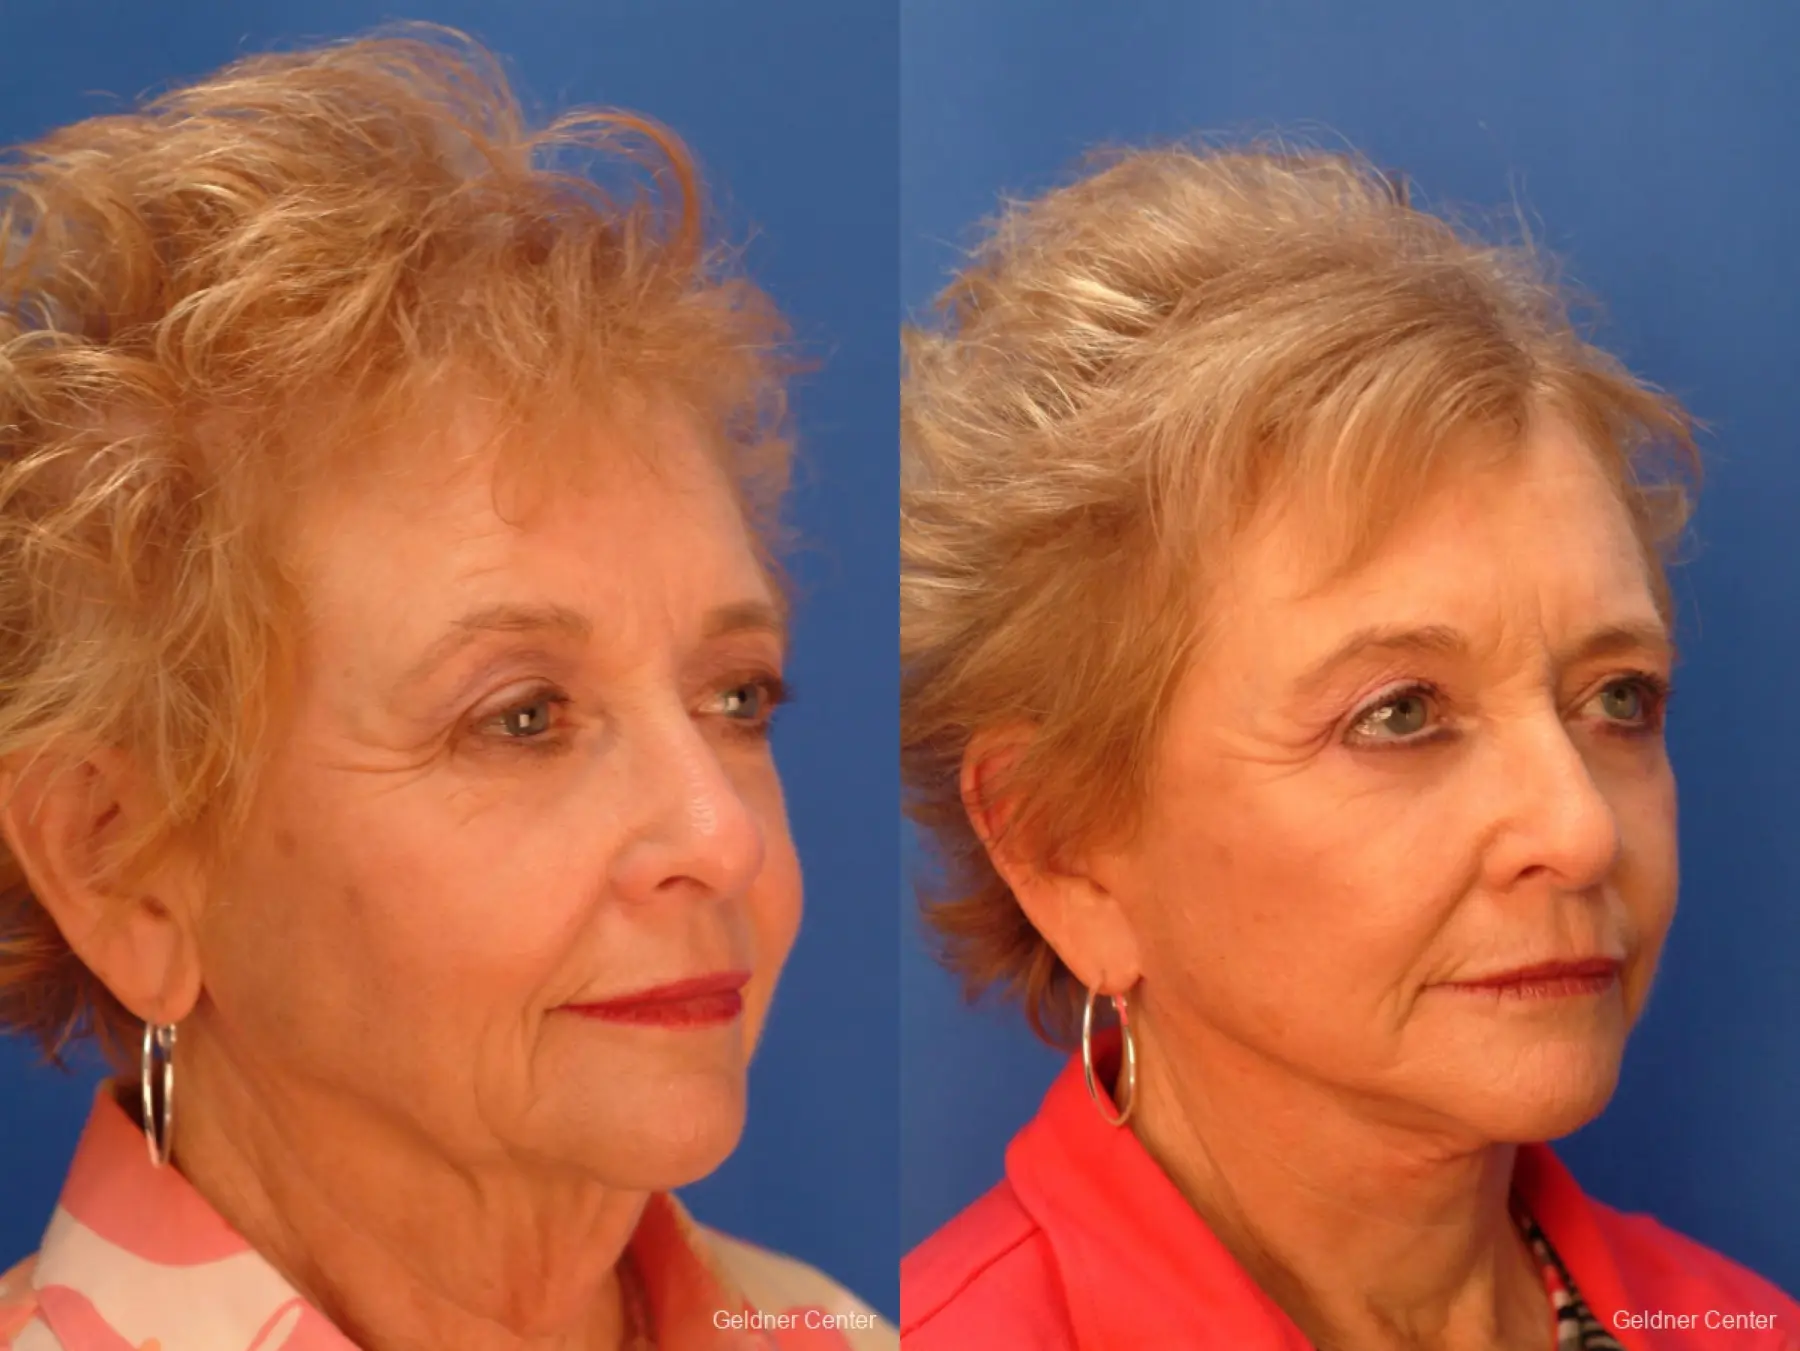 Neck Lift: Patient 5 - Before and After 3